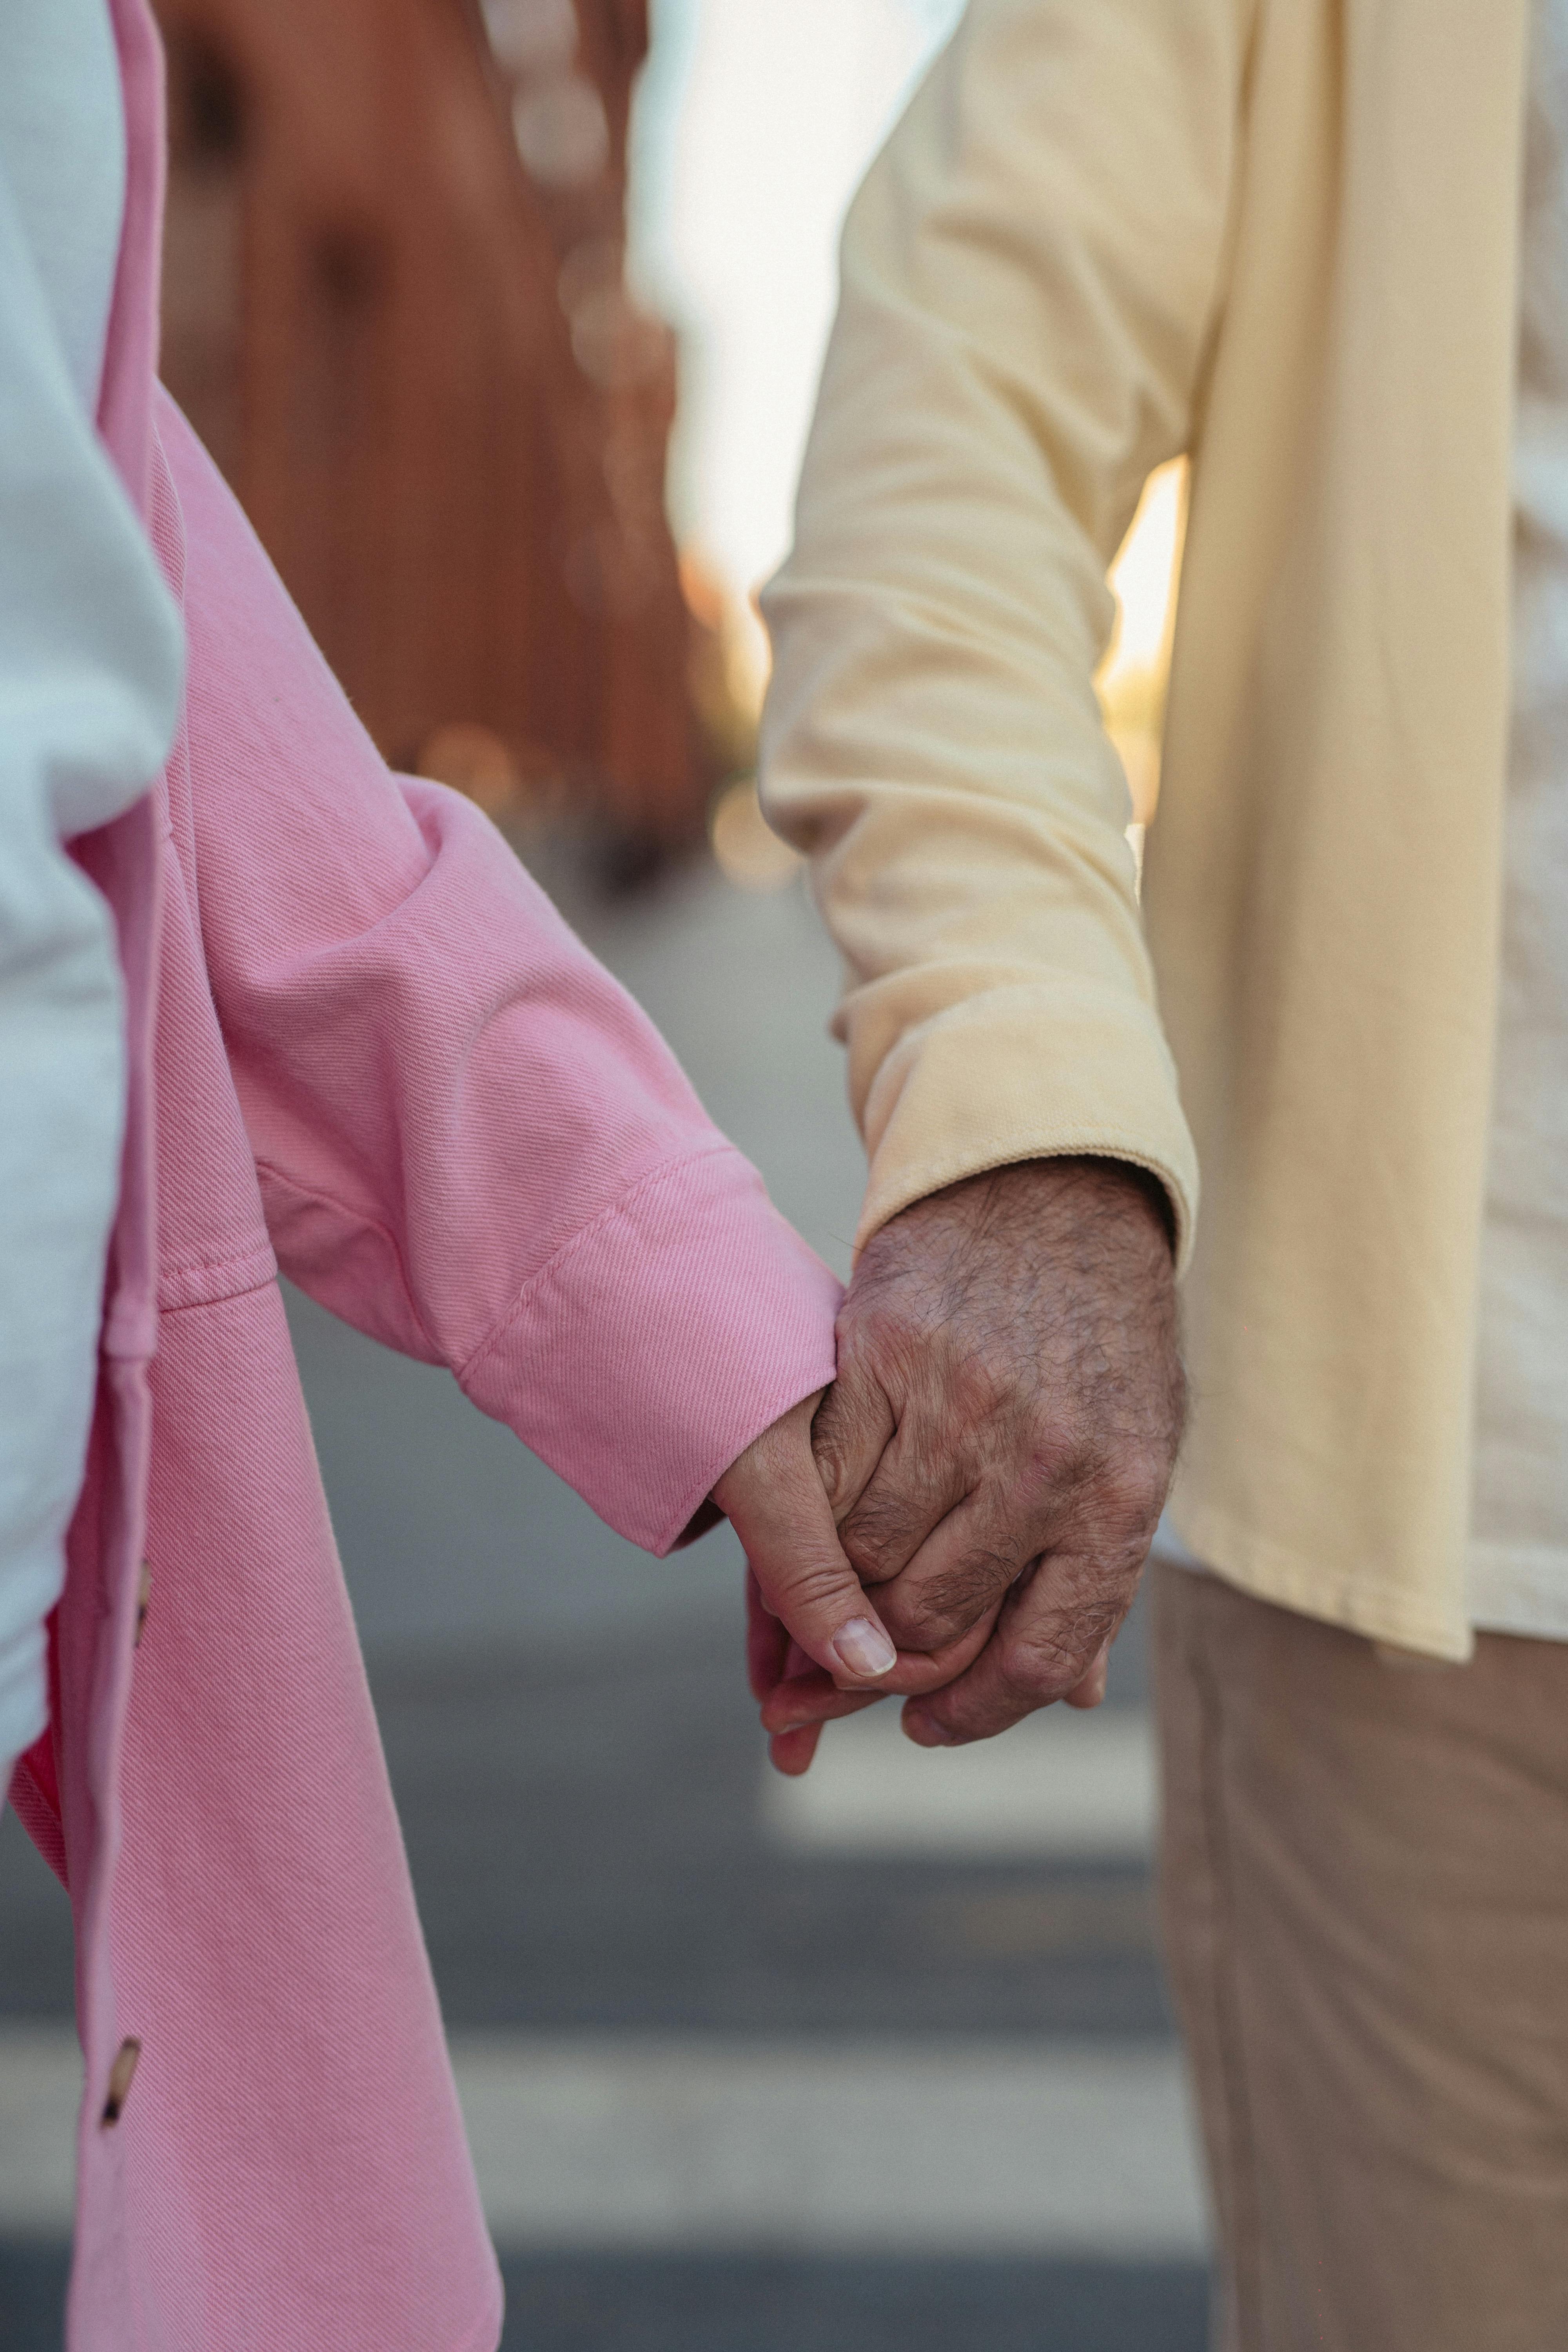 A couple holding hands | Source: Pexels